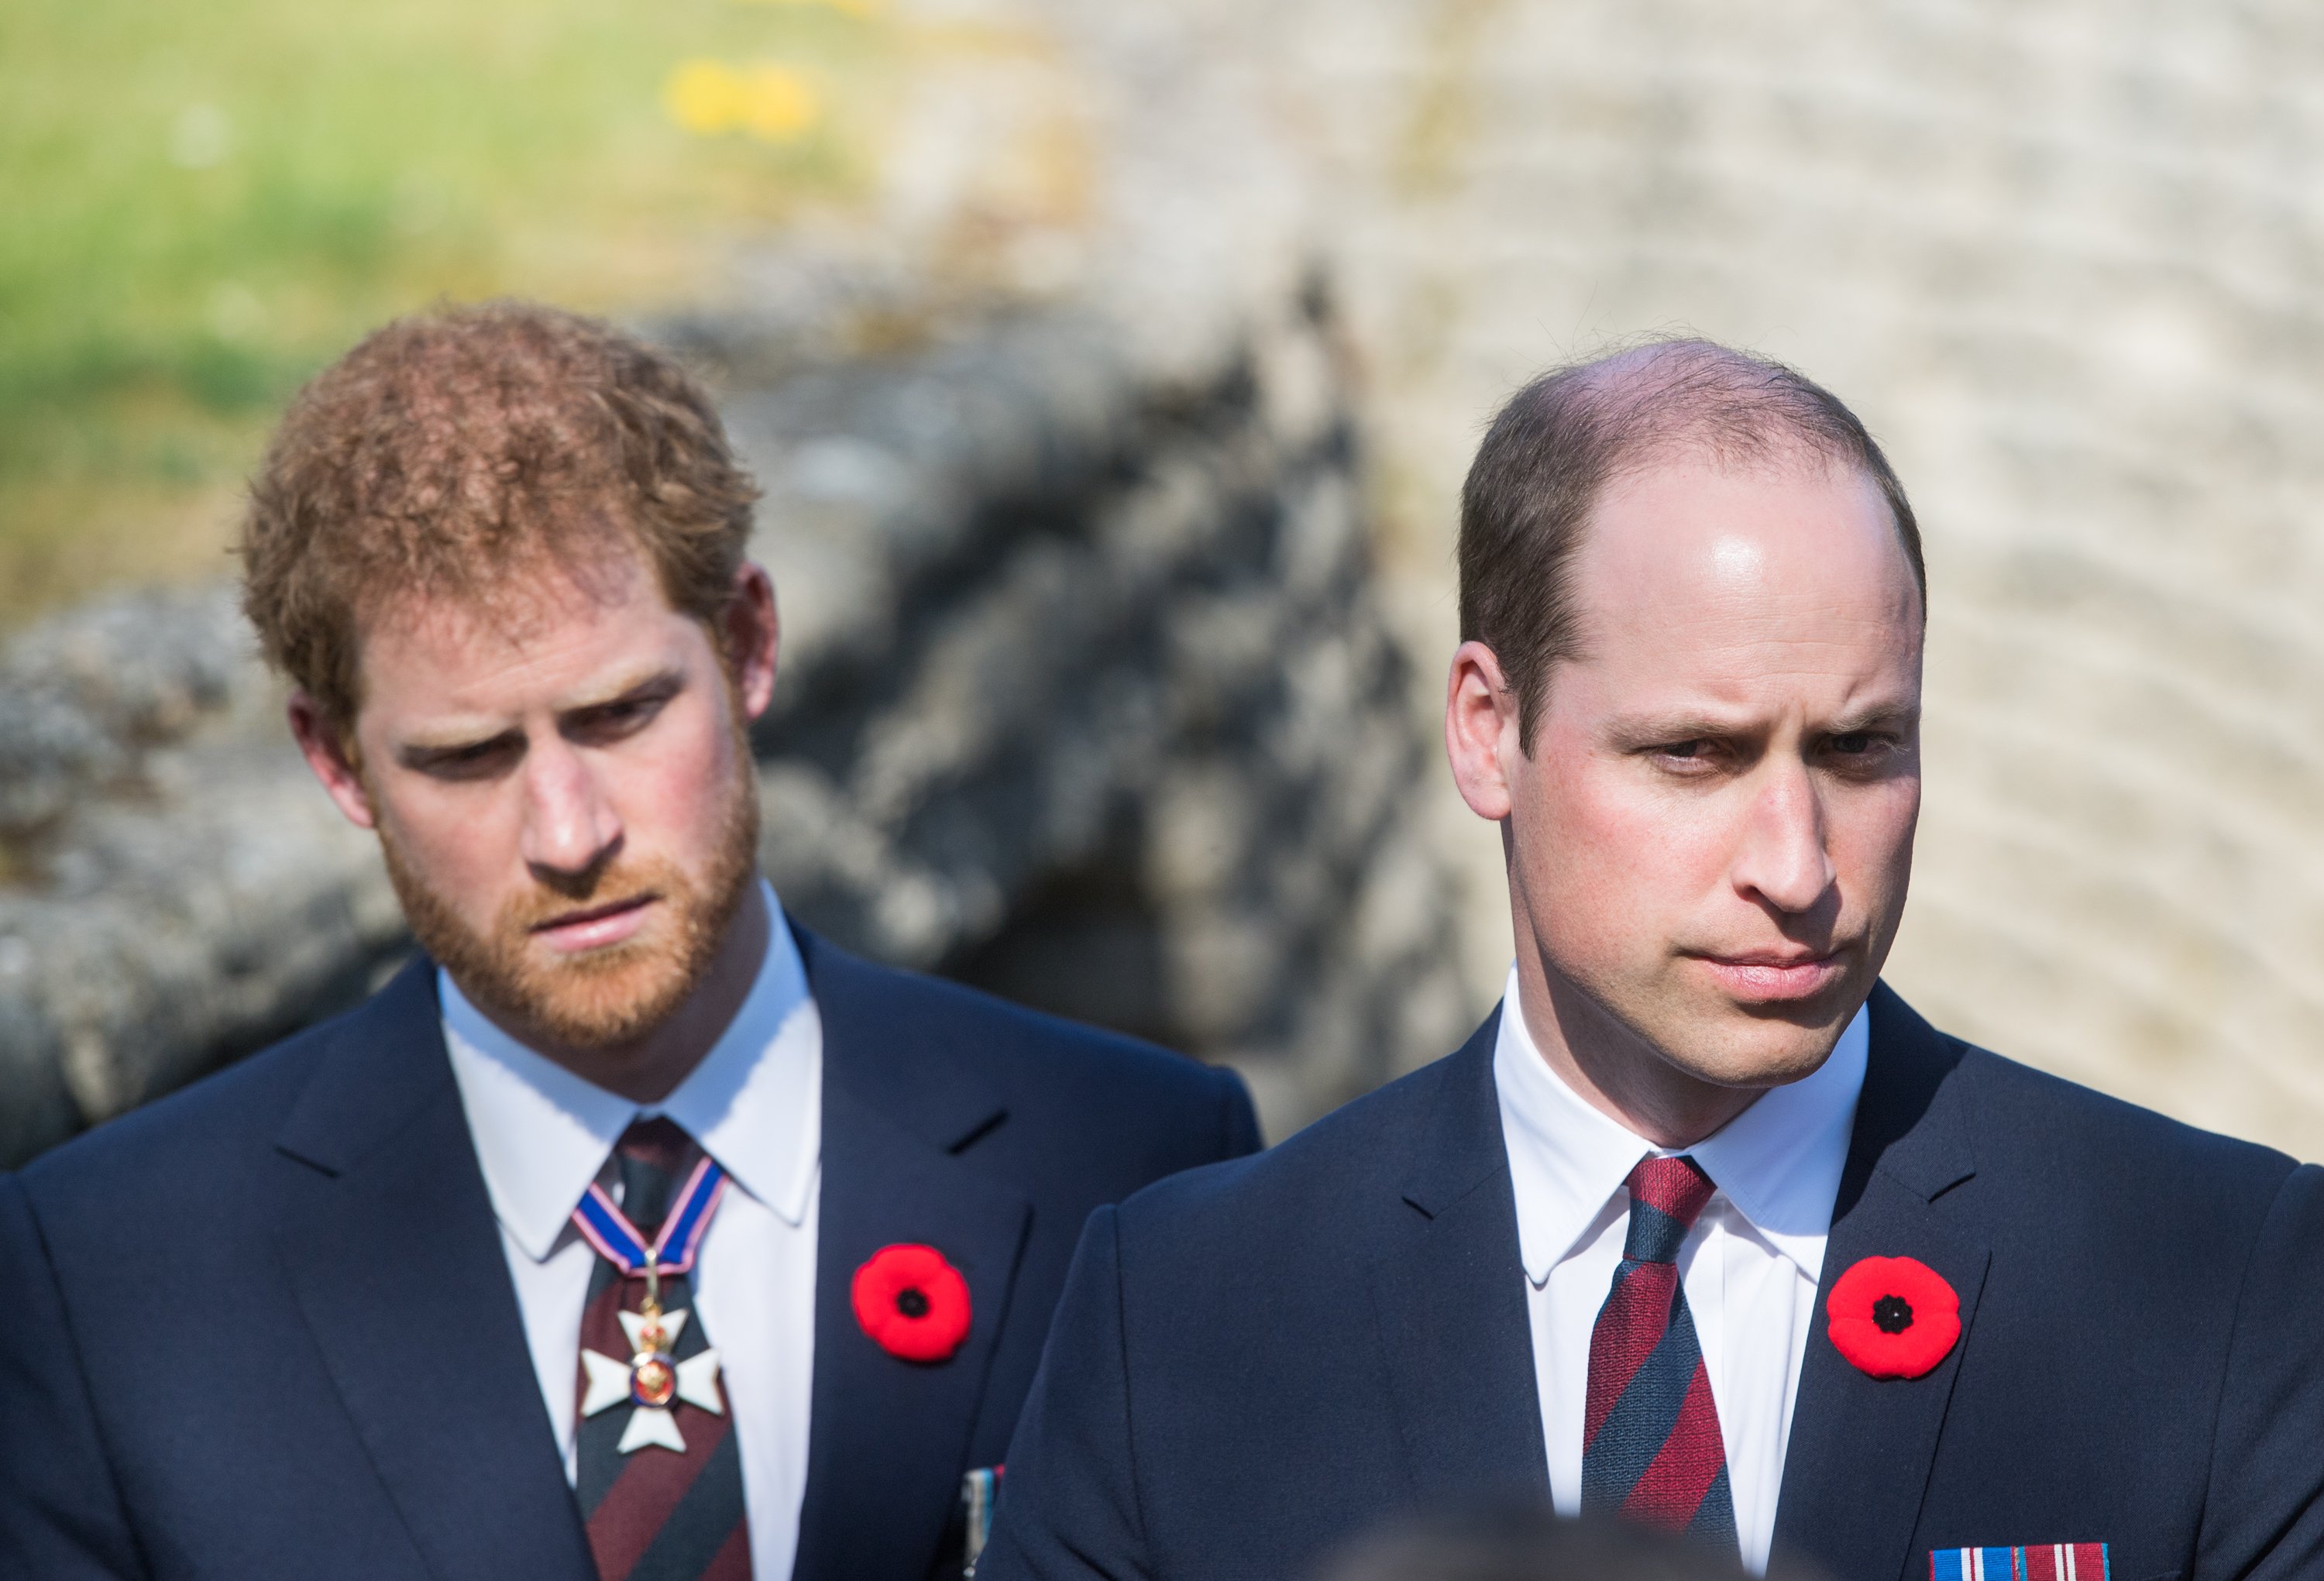 Prince William, Duke of Cambridge and Prince Harry, Duke of Sussex during the commemorations for the 100th anniversary of the battle of Vimy Ridge on April 9, 2017 in Lille, France. / Source: Getty Images